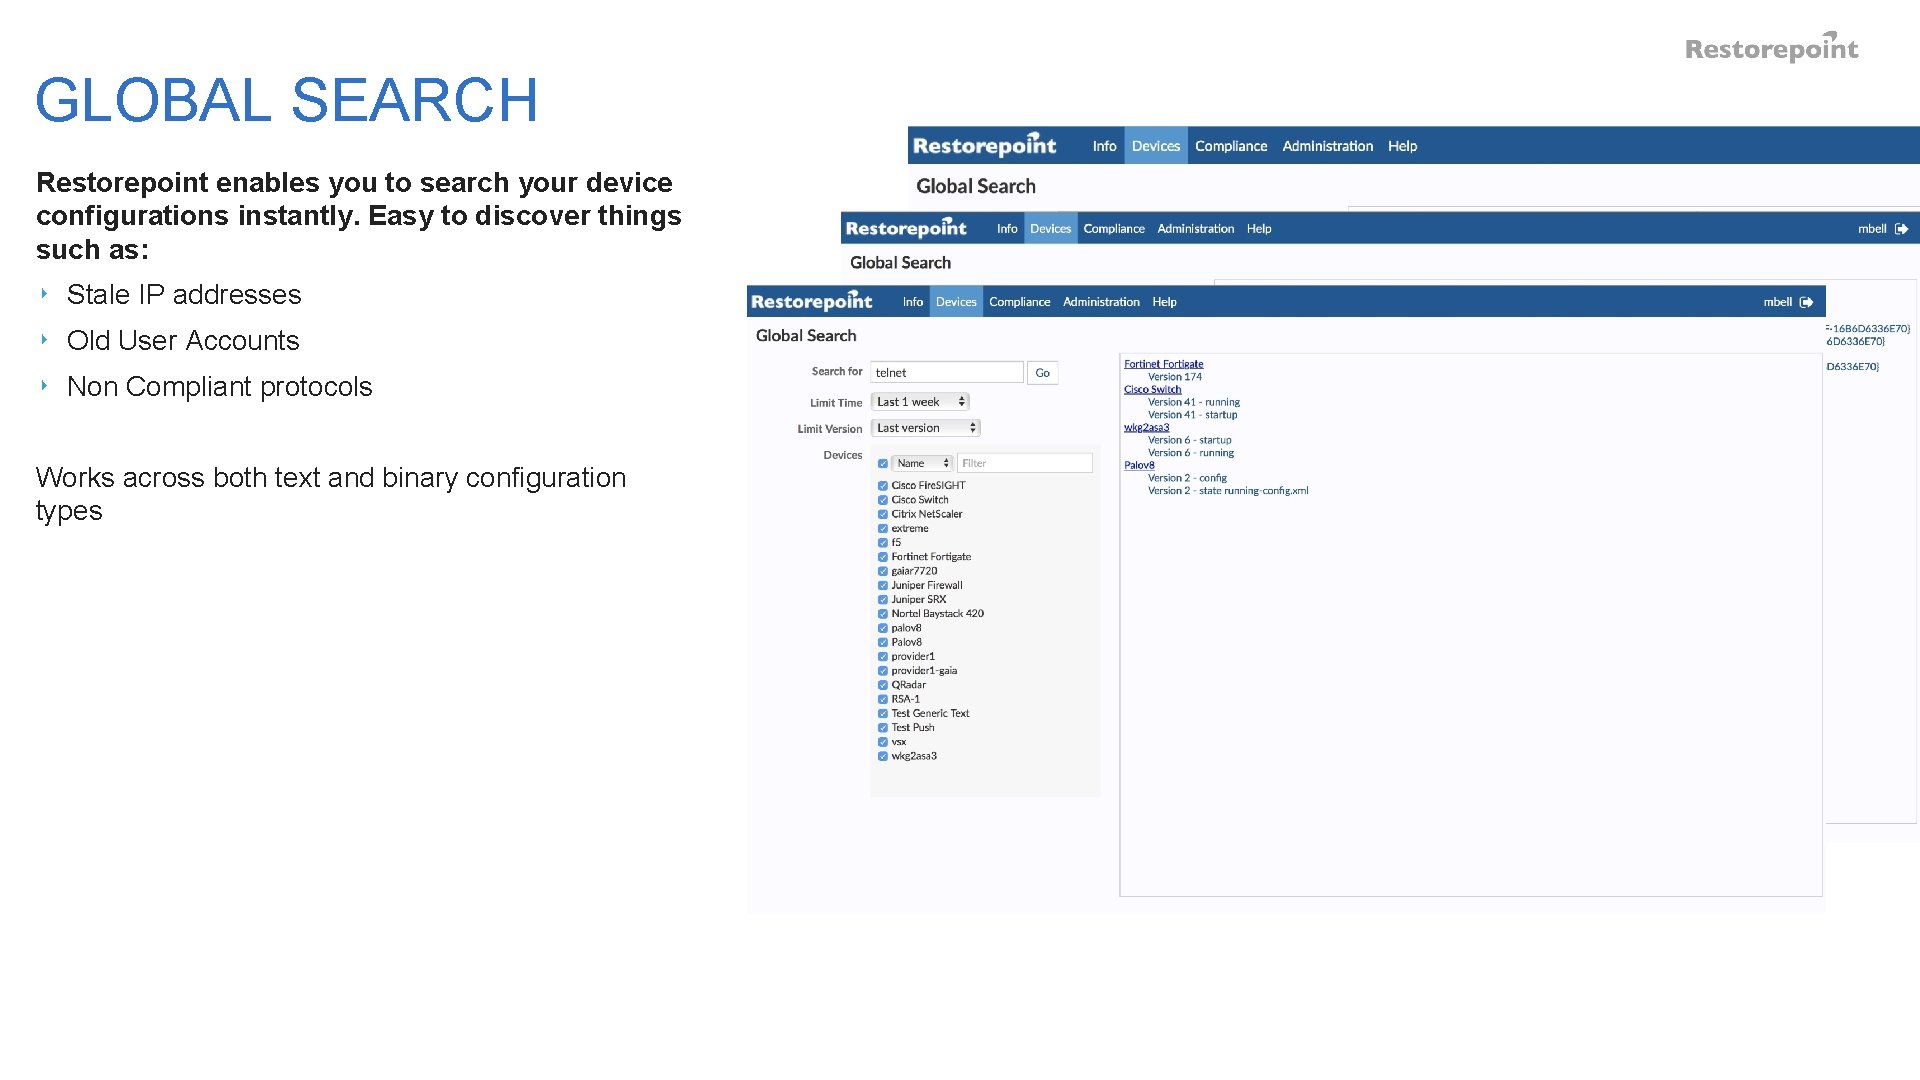 GLOBAL SEARCH Restorepoint enables you to search your device configurations instantly. Easy to discover